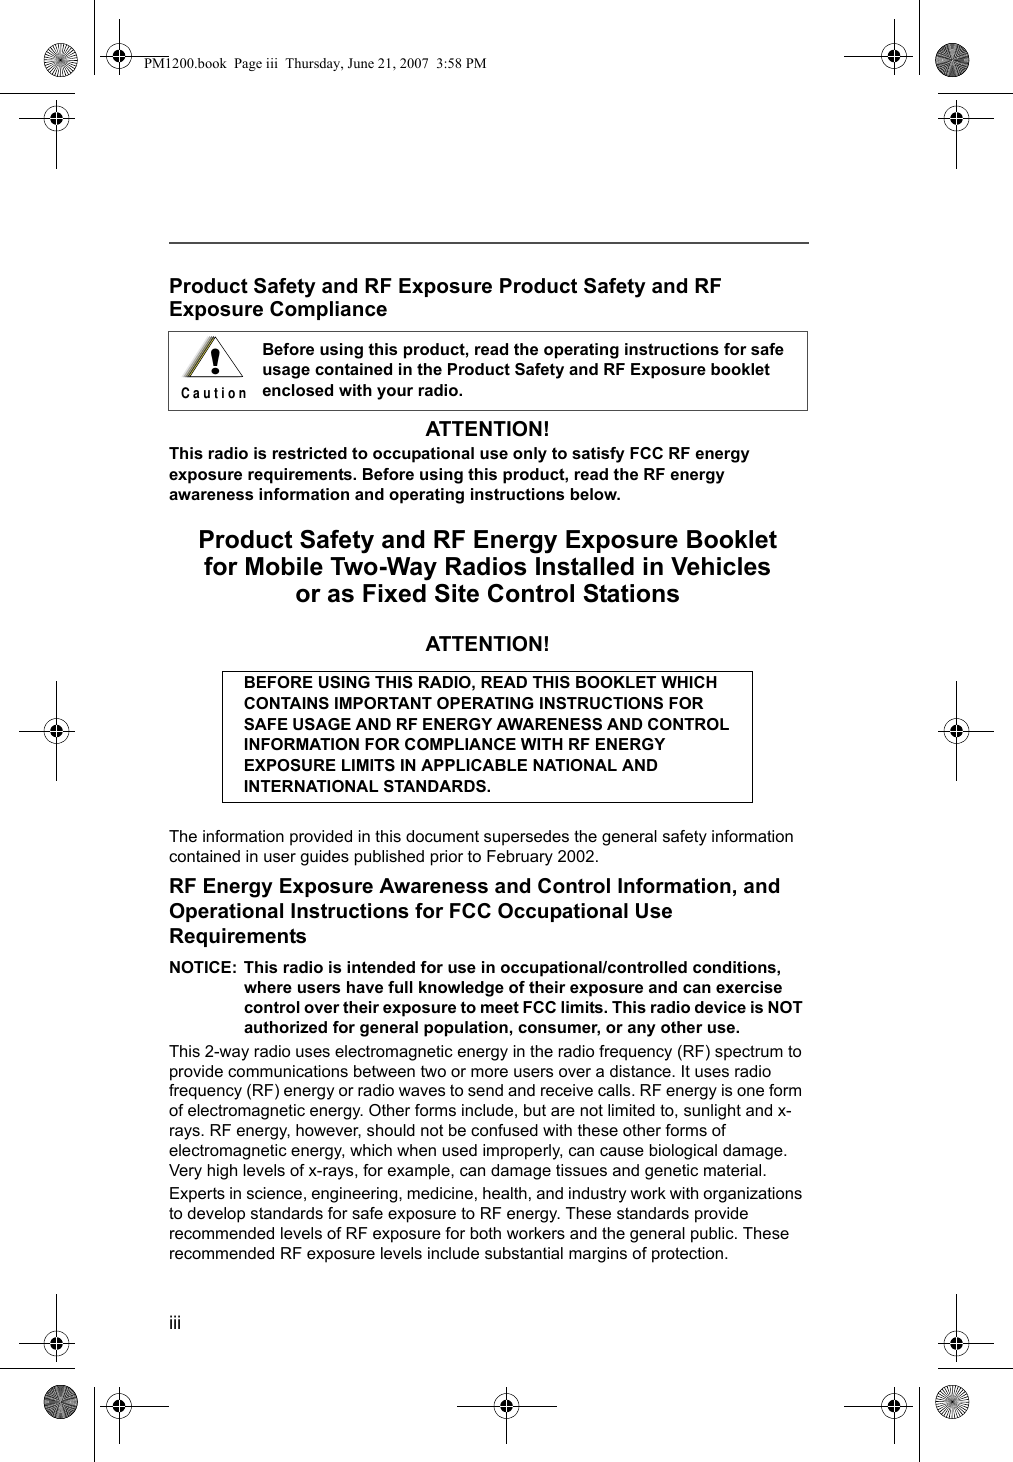 iiiProduct Safety and RF Exposure Product Safety and RF Exposure ComplianceATTENTION! This radio is restricted to occupational use only to satisfy FCC RF energy exposure requirements. Before using this product, read the RF energy awareness information and operating instructions below. Product Safety and RF Energy Exposure Bookletfor Mobile Two-Way Radios Installed in Vehicles or as Fixed Site Control StationsATTENTION!The information provided in this document supersedes the general safety information contained in user guides published prior to February 2002.RF Energy Exposure Awareness and Control Information, and Operational Instructions for FCC Occupational Use RequirementsNOTICE: This radio is intended for use in occupational/controlled conditions, where users have full knowledge of their exposure and can exercise control over their exposure to meet FCC limits. This radio device is NOT authorized for general population, consumer, or any other use.This 2-way radio uses electromagnetic energy in the radio frequency (RF) spectrum to provide communications between two or more users over a distance. It uses radio frequency (RF) energy or radio waves to send and receive calls. RF energy is one form of electromagnetic energy. Other forms include, but are not limited to, sunlight and x-rays. RF energy, however, should not be confused with these other forms of electromagnetic energy, which when used improperly, can cause biological damage. Very high levels of x-rays, for example, can damage tissues and genetic material.Experts in science, engineering, medicine, health, and industry work with organizations to develop standards for safe exposure to RF energy. These standards provide recommended levels of RF exposure for both workers and the general public. These recommended RF exposure levels include substantial margins of protection.Before using this product, read the operating instructions for safe usage contained in the Product Safety and RF Exposure booklet enclosed with your radio.BEFORE USING THIS RADIO, READ THIS BOOKLET WHICH CONTAINS IMPORTANT OPERATING INSTRUCTIONS FOR SAFE USAGE AND RF ENERGY AWARENESS AND CONTROL INFORMATION FOR COMPLIANCE WITH RF ENERGY EXPOSURE LIMITS IN APPLICABLE NATIONAL AND INTERNATIONAL STANDARDS.!C a u t i o nPM1200.book  Page iii  Thursday, June 21, 2007  3:58 PM